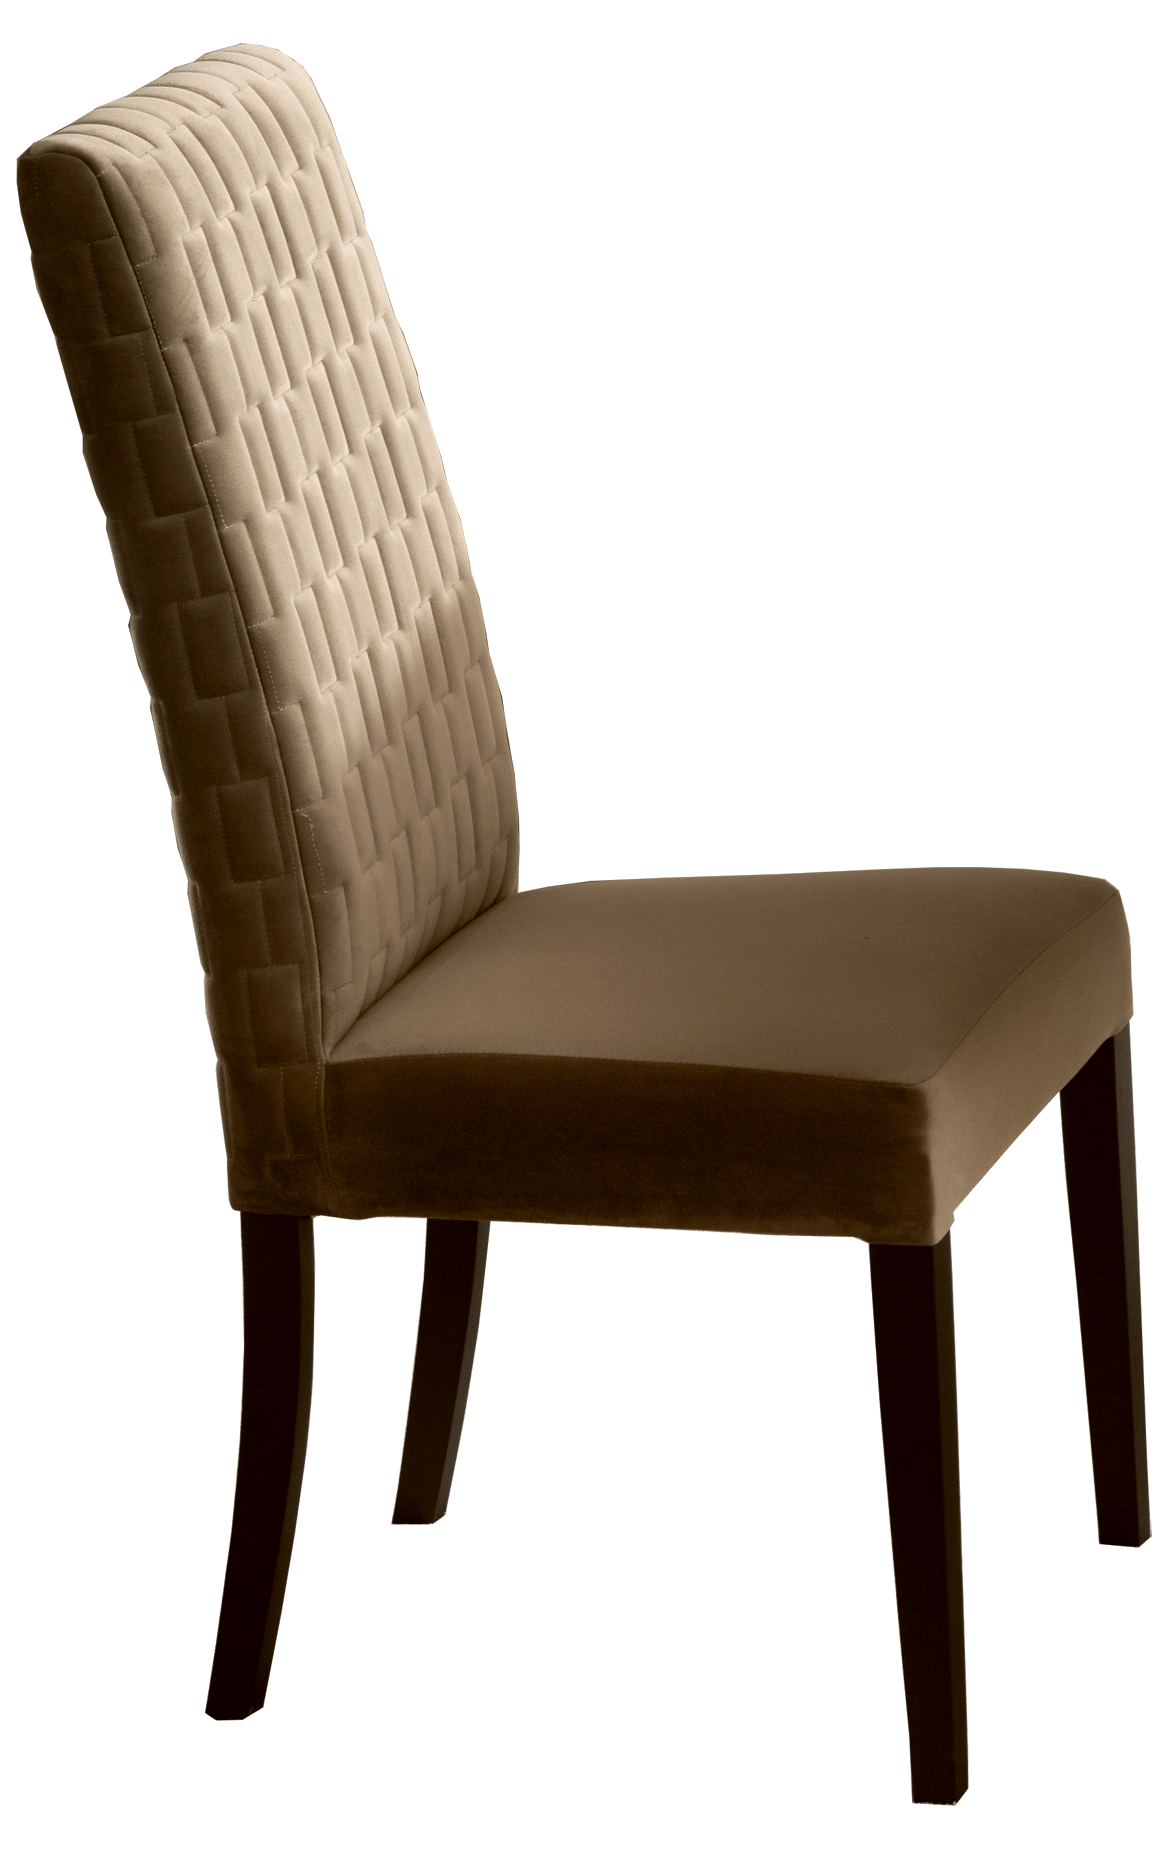 Bedroom Furniture Mirrors Poesia Dining Chair by Arredoclassic